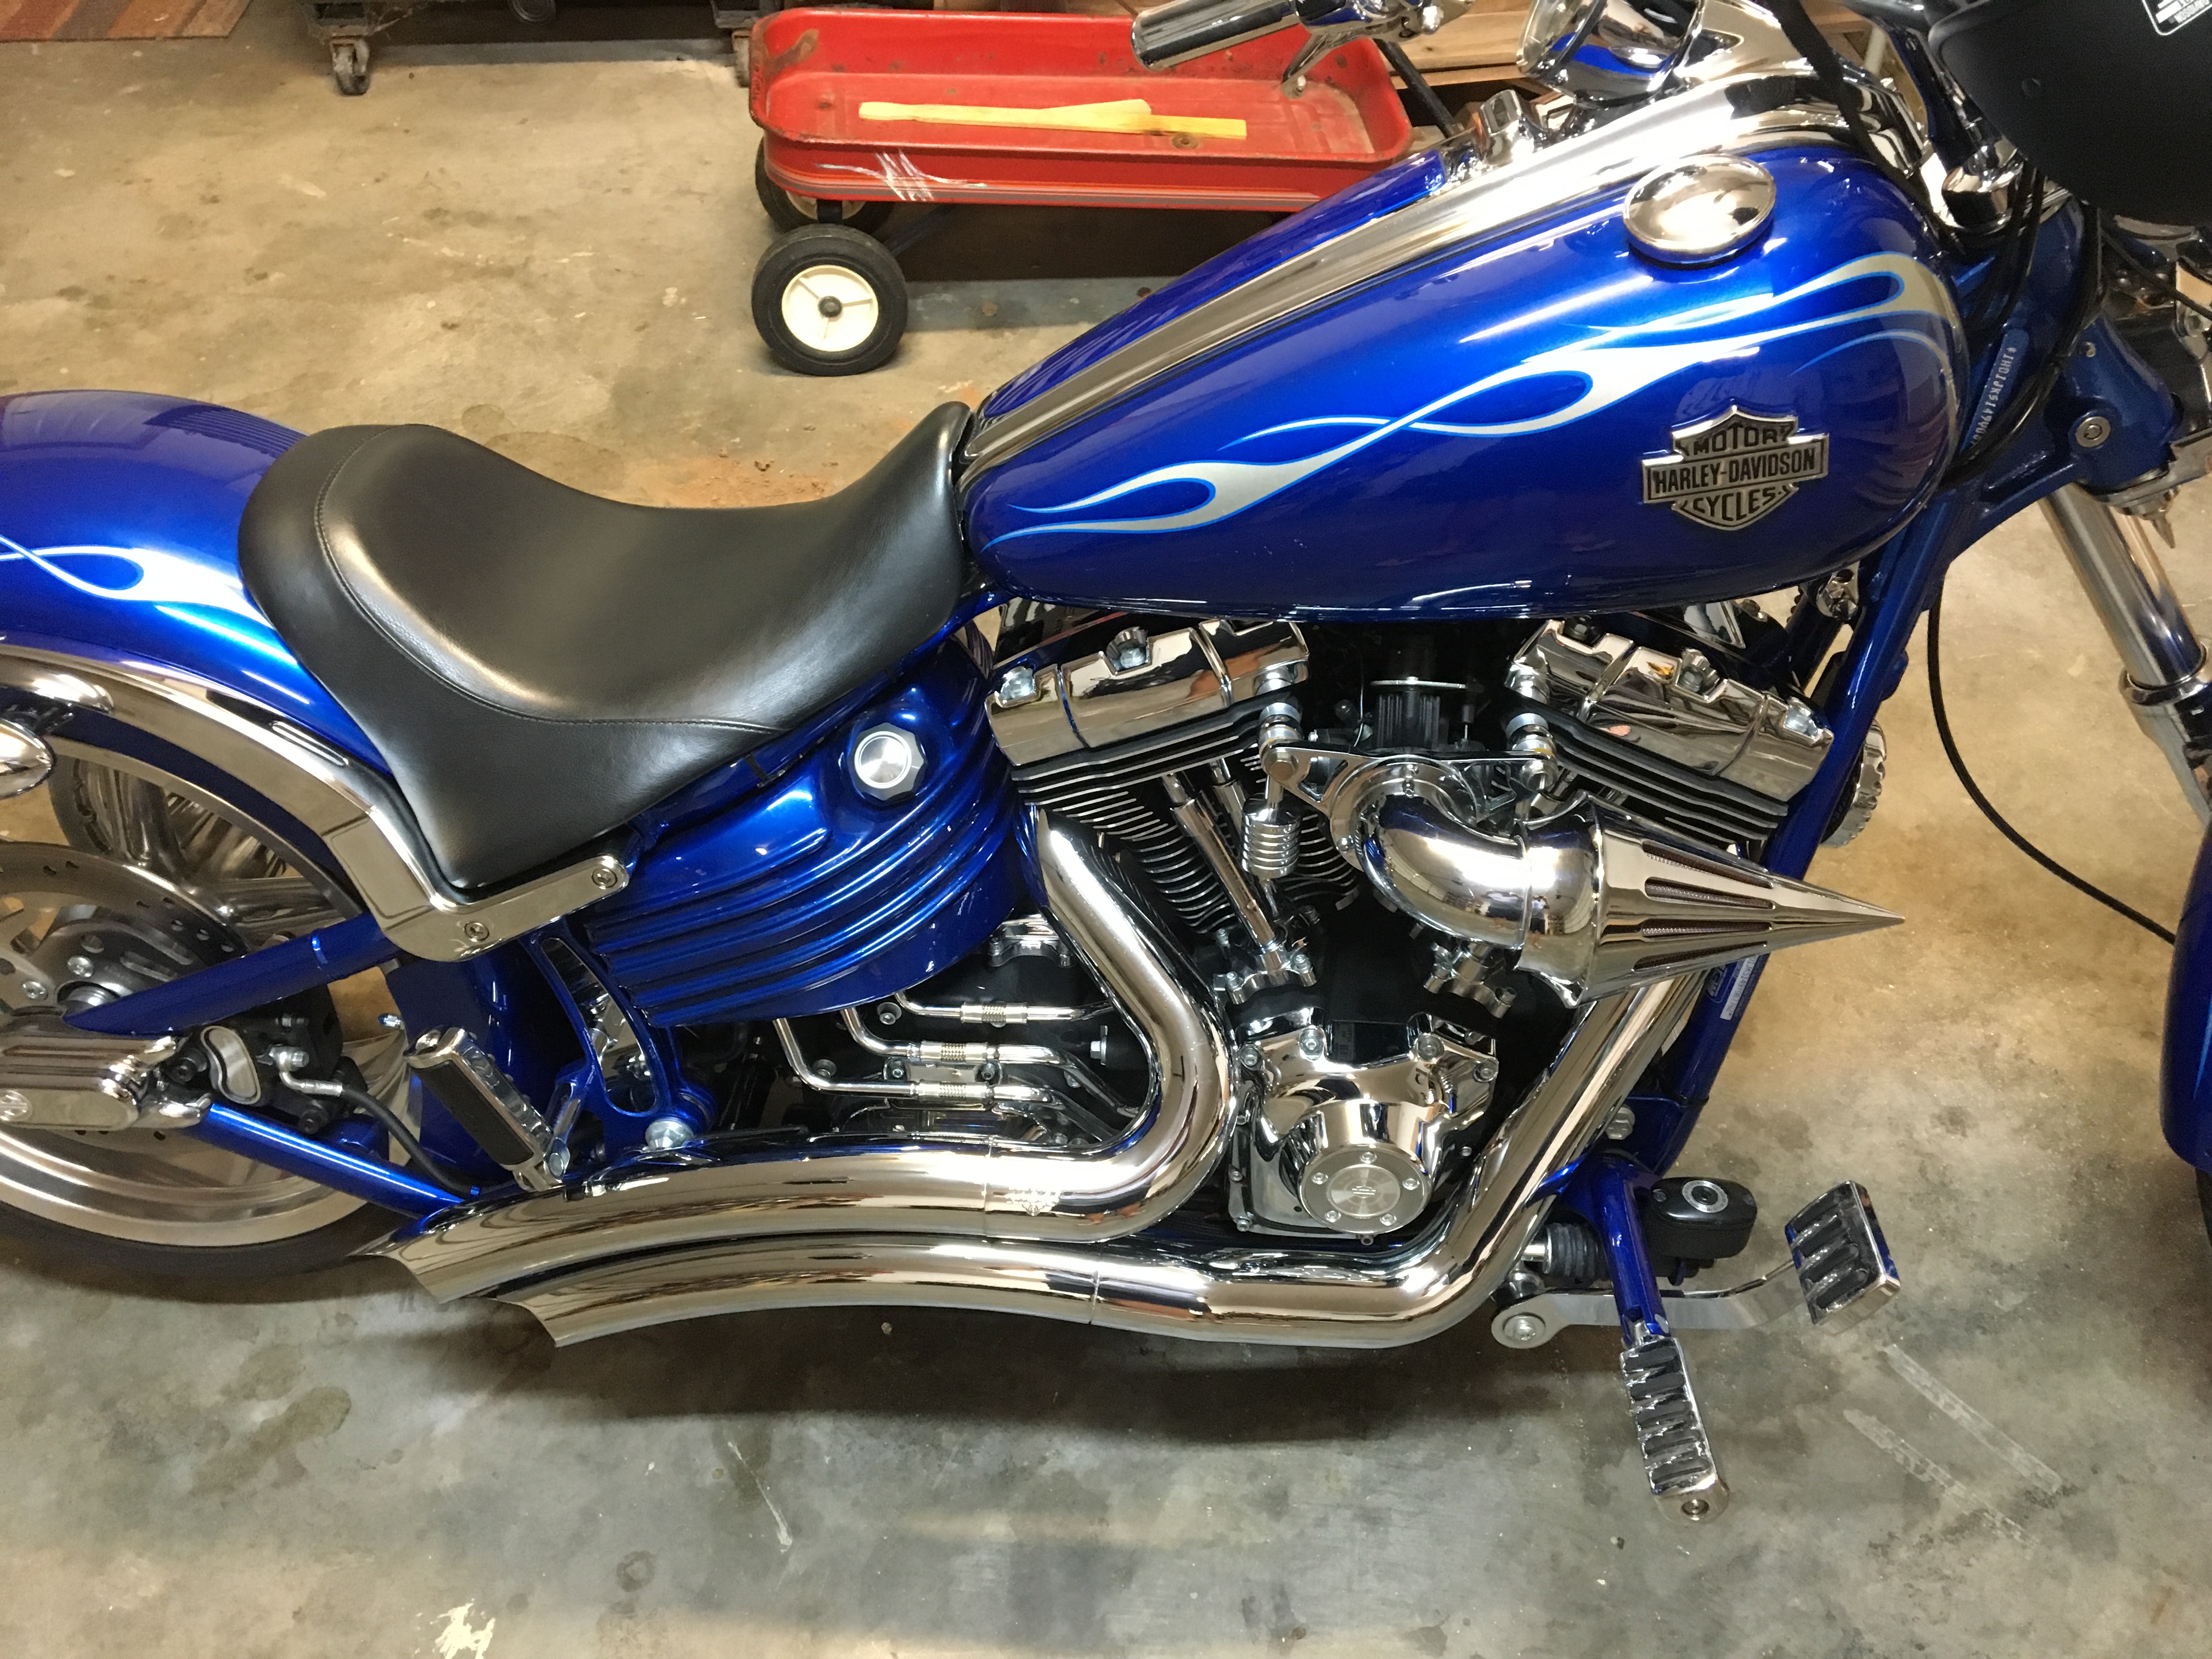 2009 Rocker C With Hearland Kit Seat Issues - Harley ...